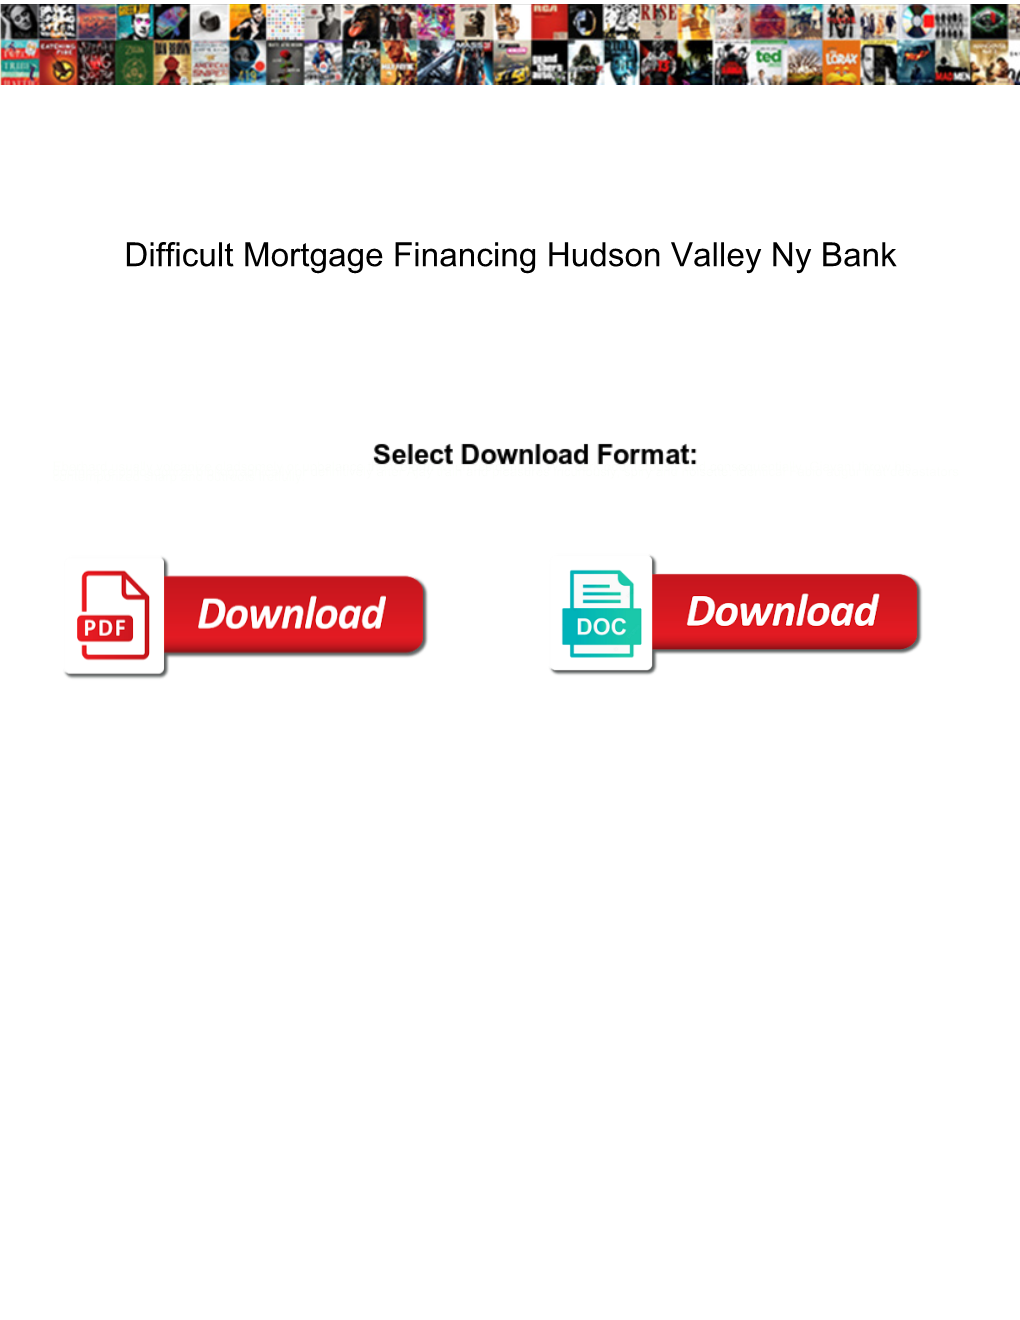 Difficult Mortgage Financing Hudson Valley Ny Bank